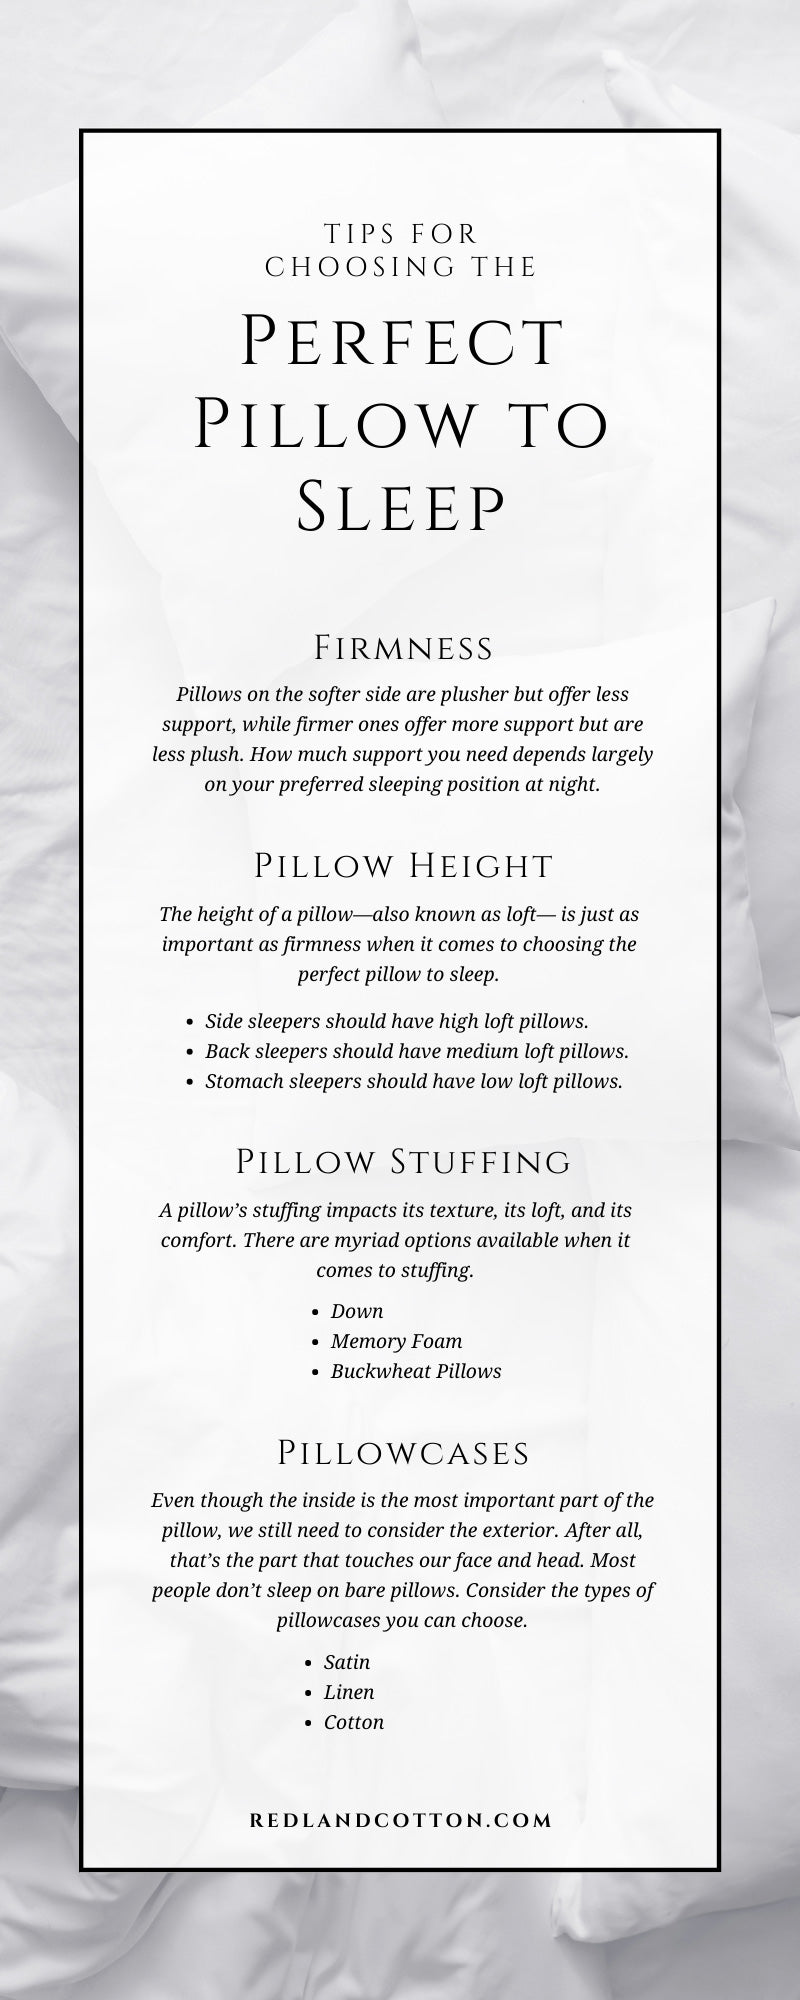 Tips for Choosing the Perfect Pillow to Sleep